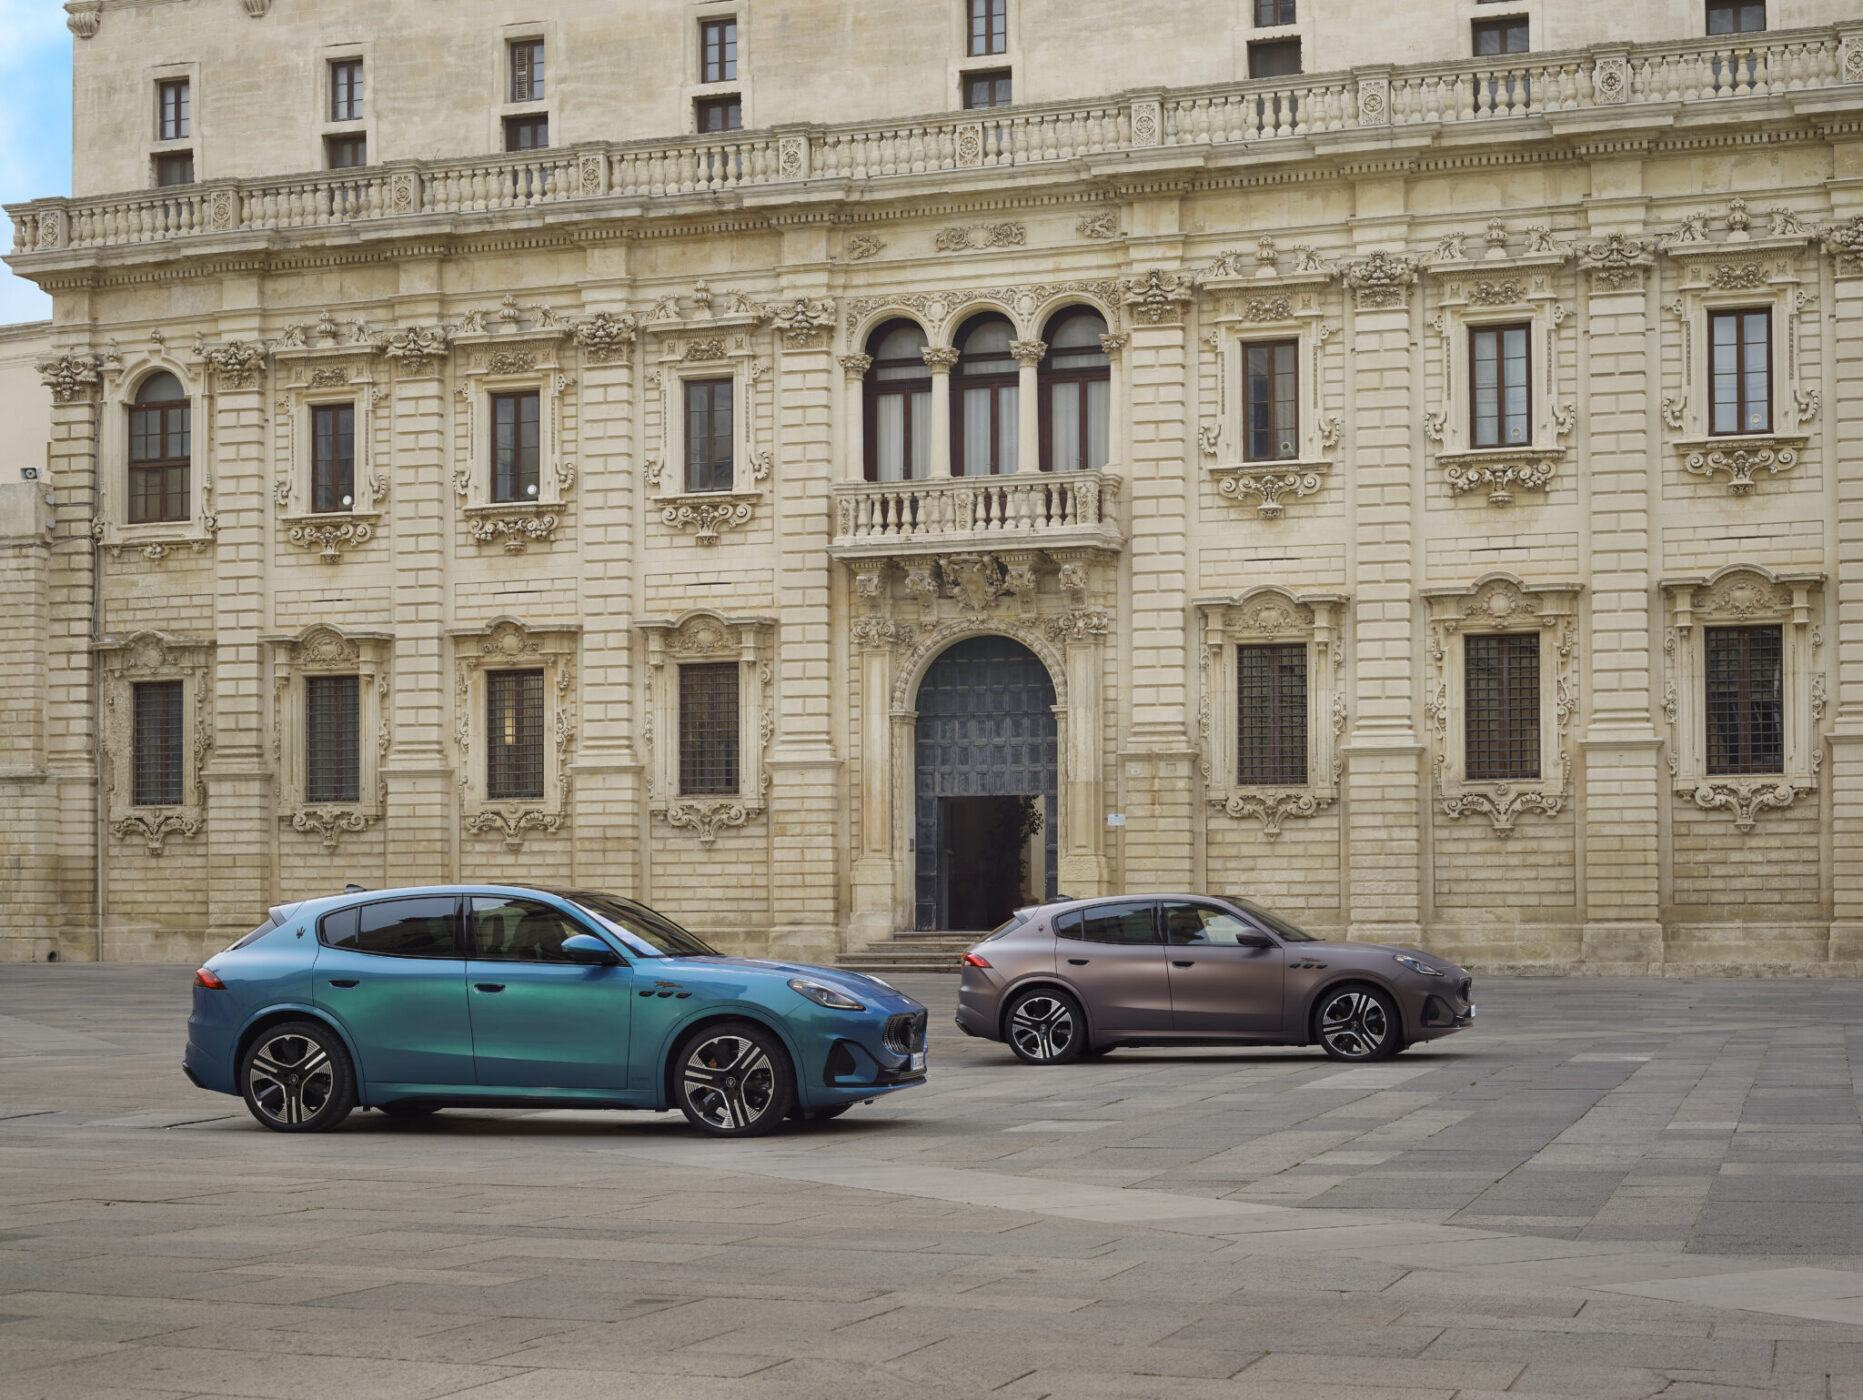 An image of two SUVs parked in the town of Lecce in the south of Italy.